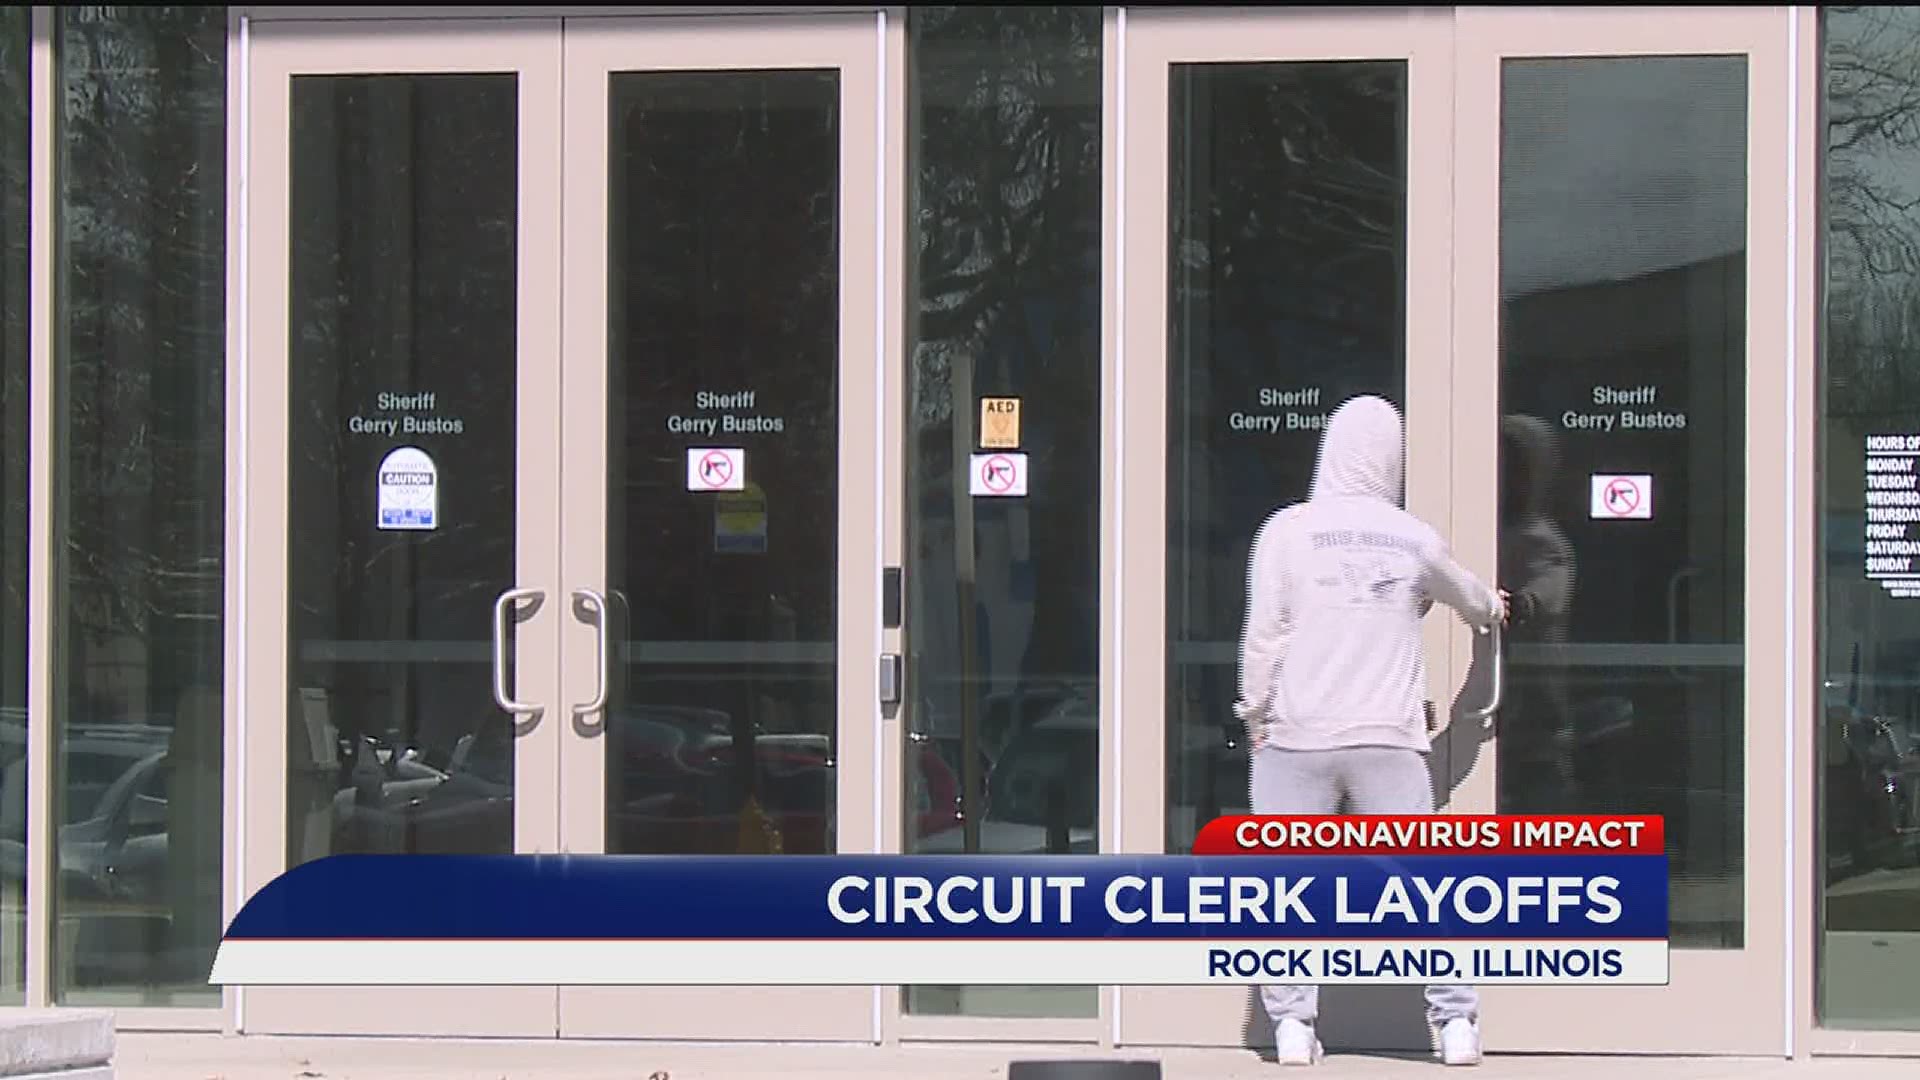 80% drop in court operations prompts layoffs at Rock Island County